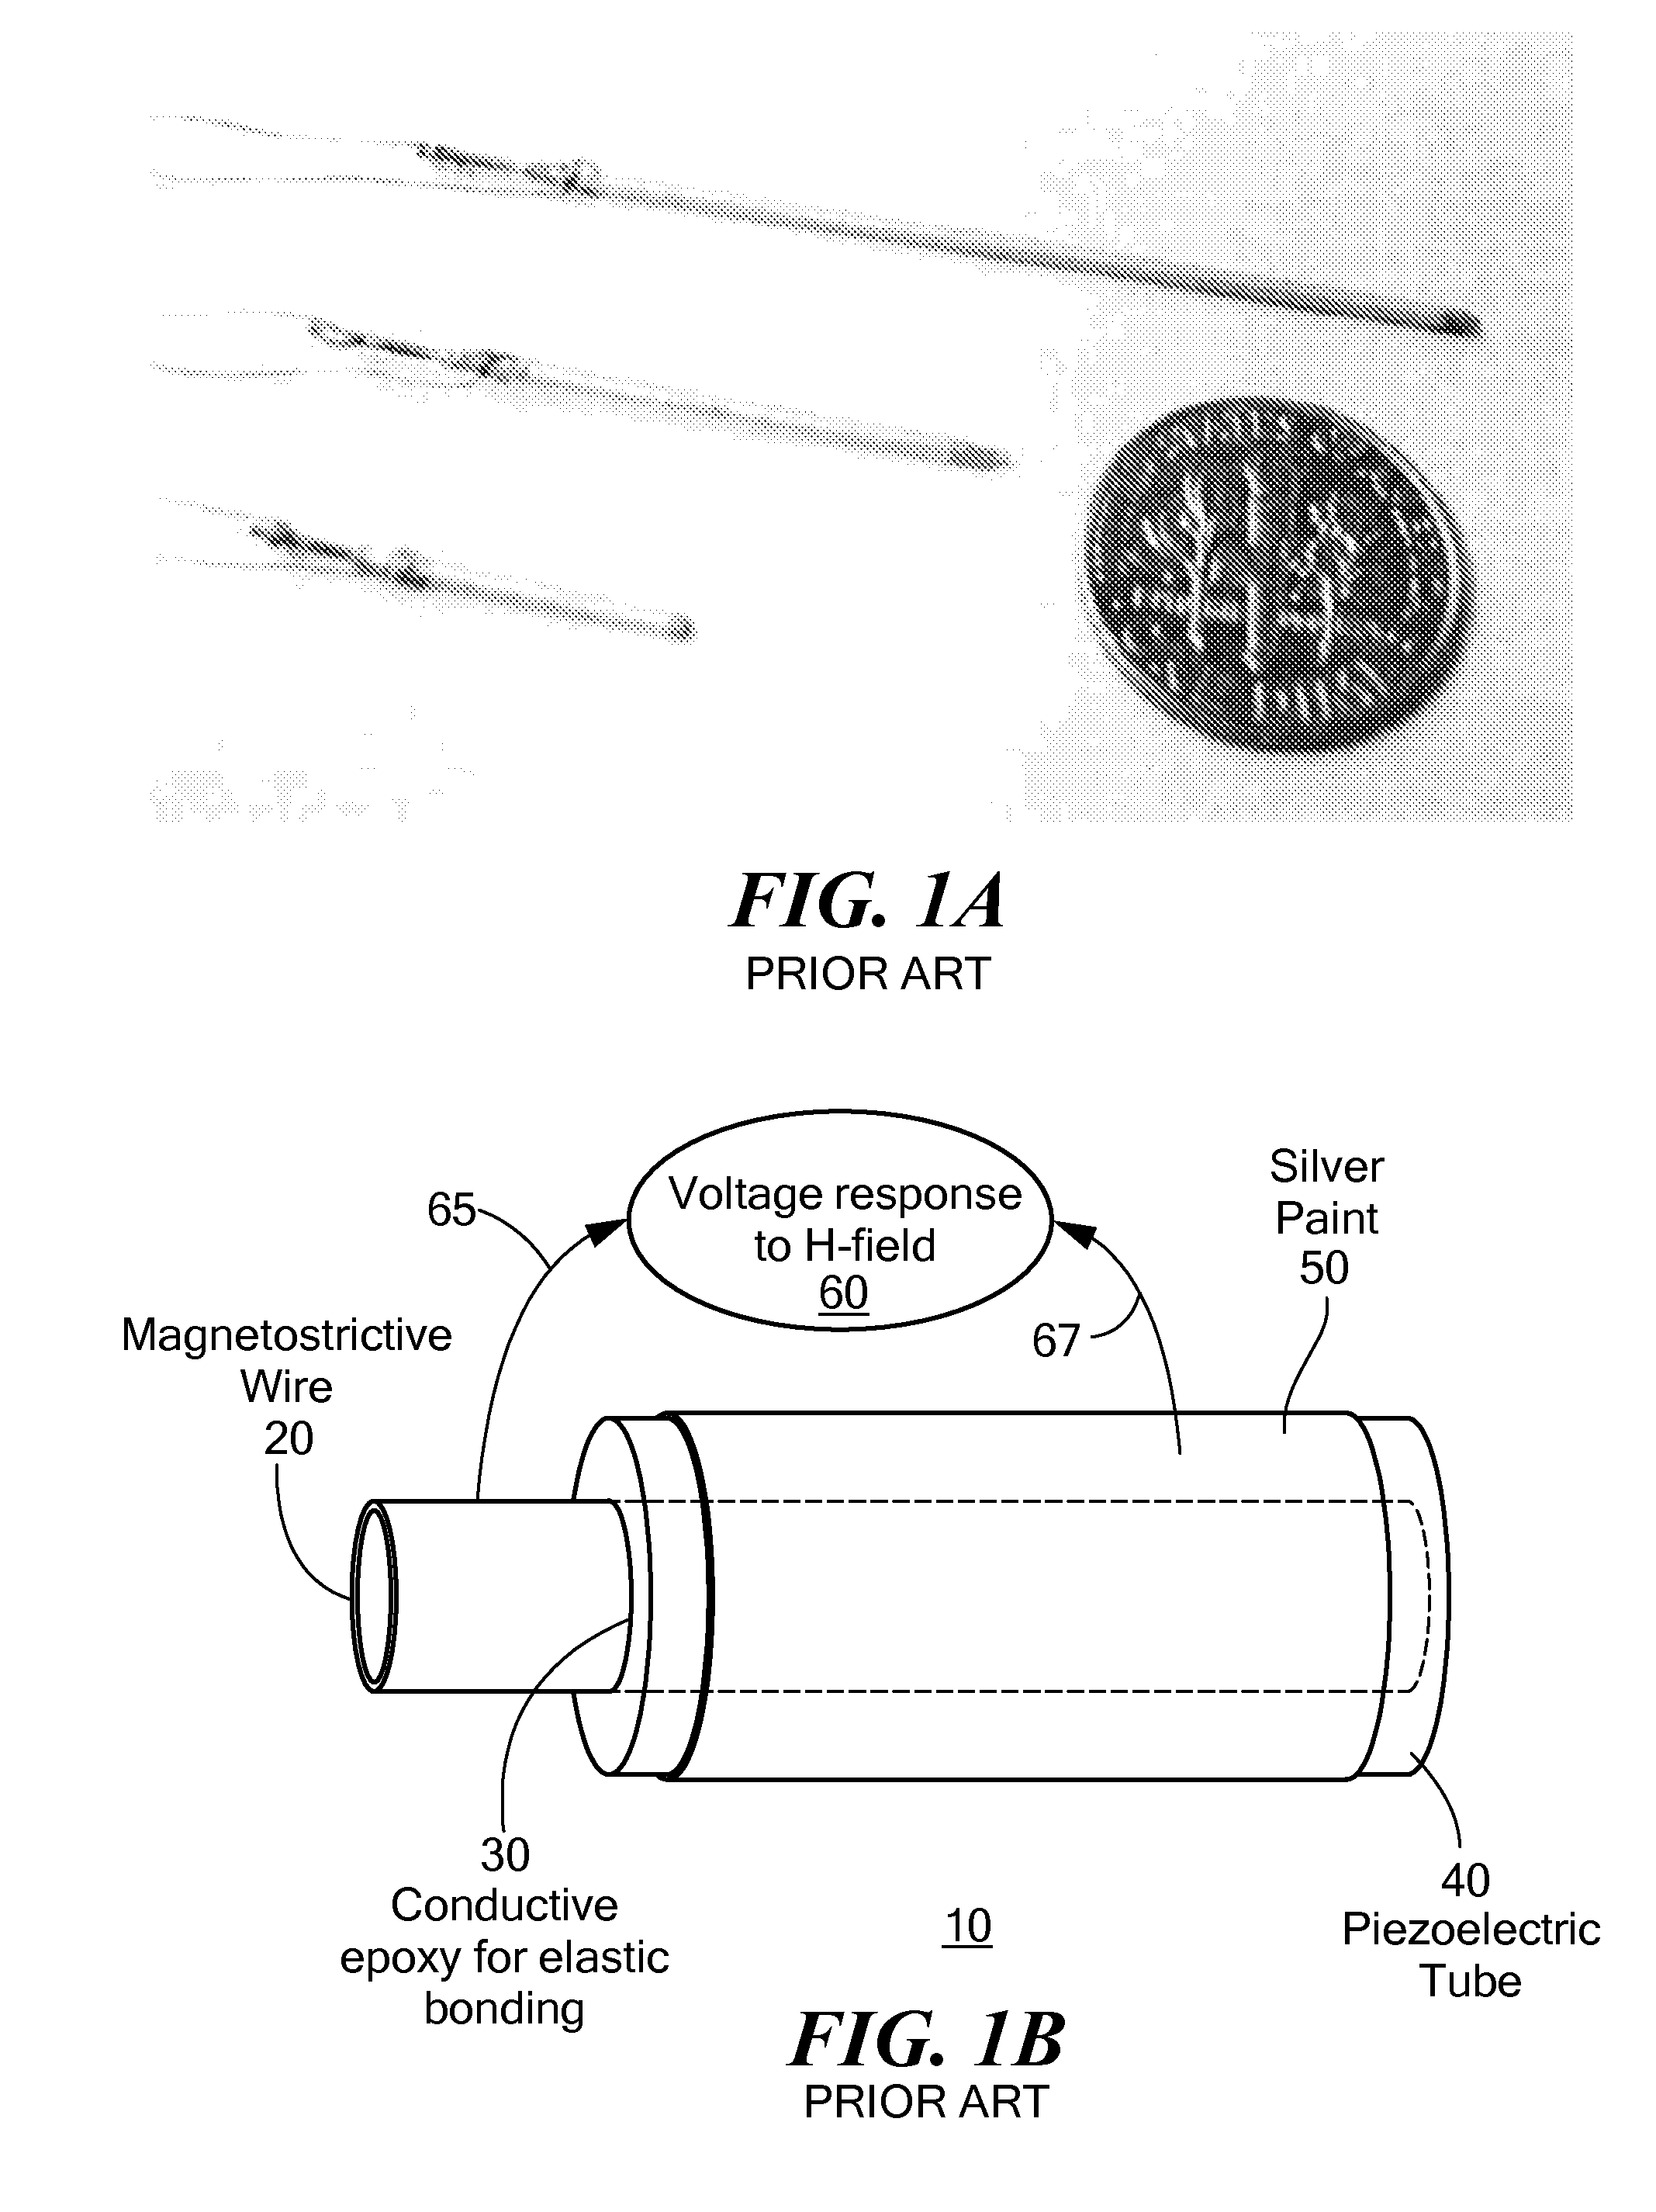 Magnetoelectric Pickup Element for Detecting Oscillating Magnetic Fields